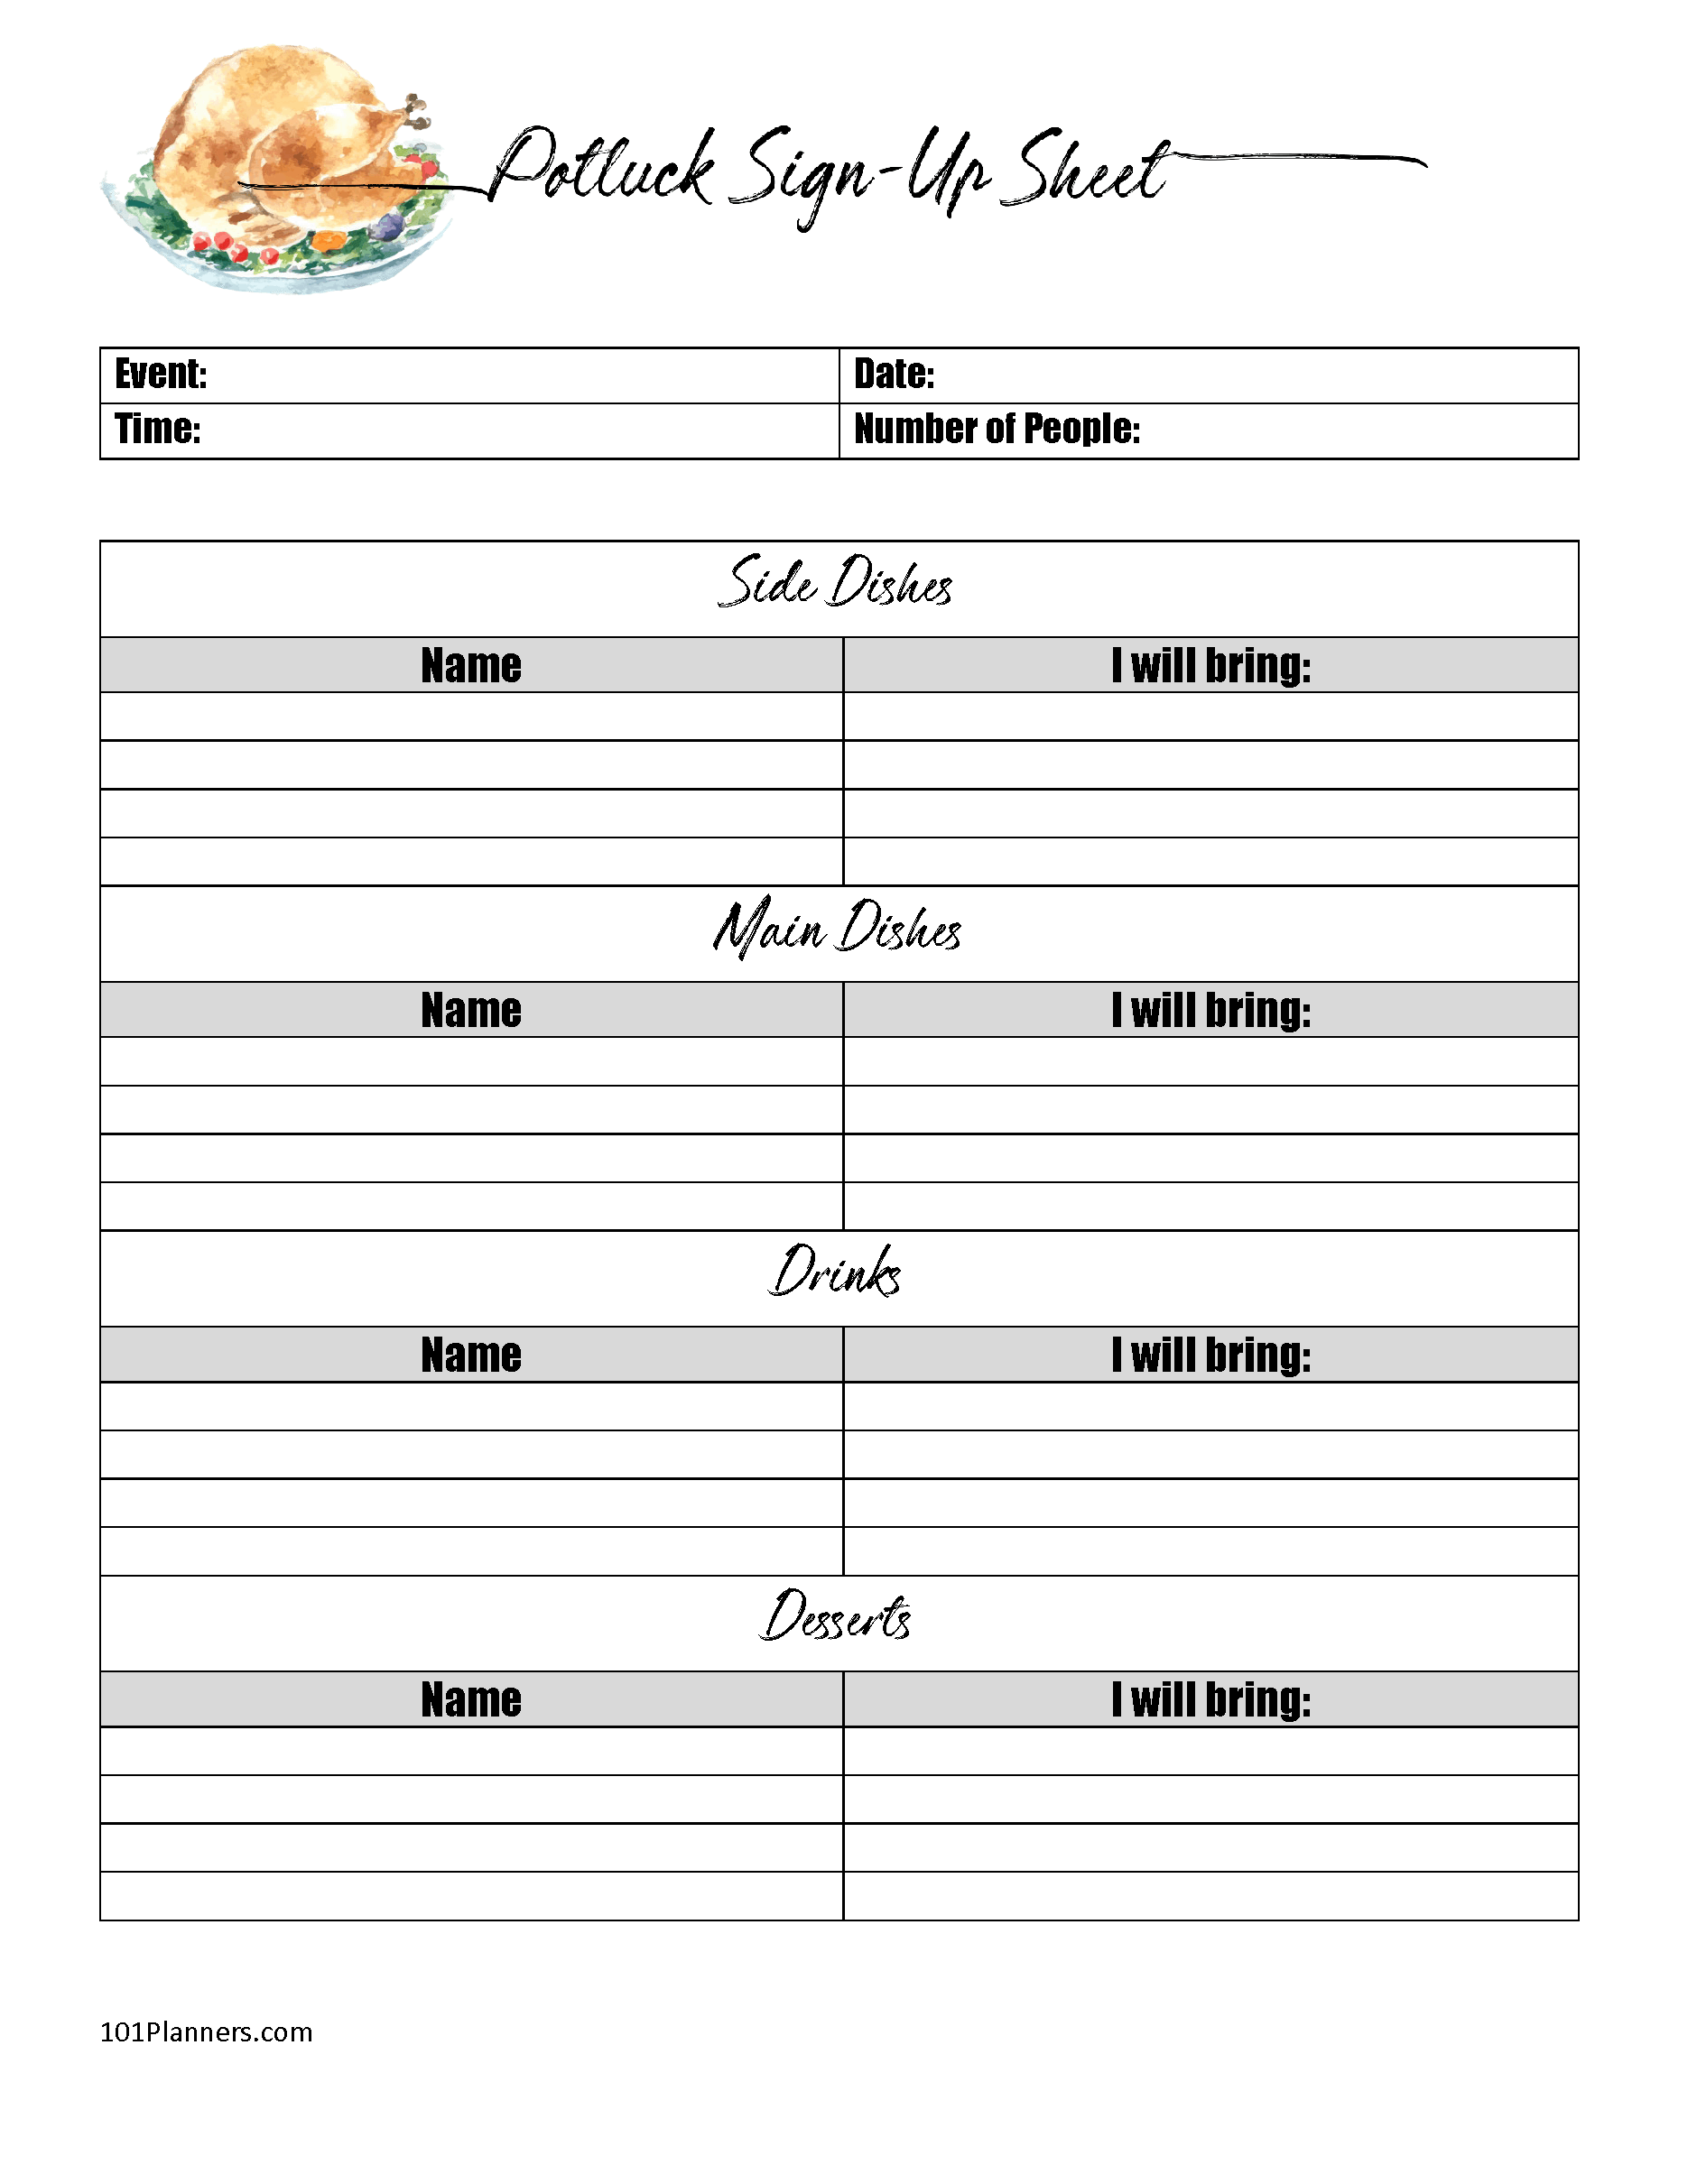 FREE Printable Potluck Sign Up Sheet | Editable | Instant Download